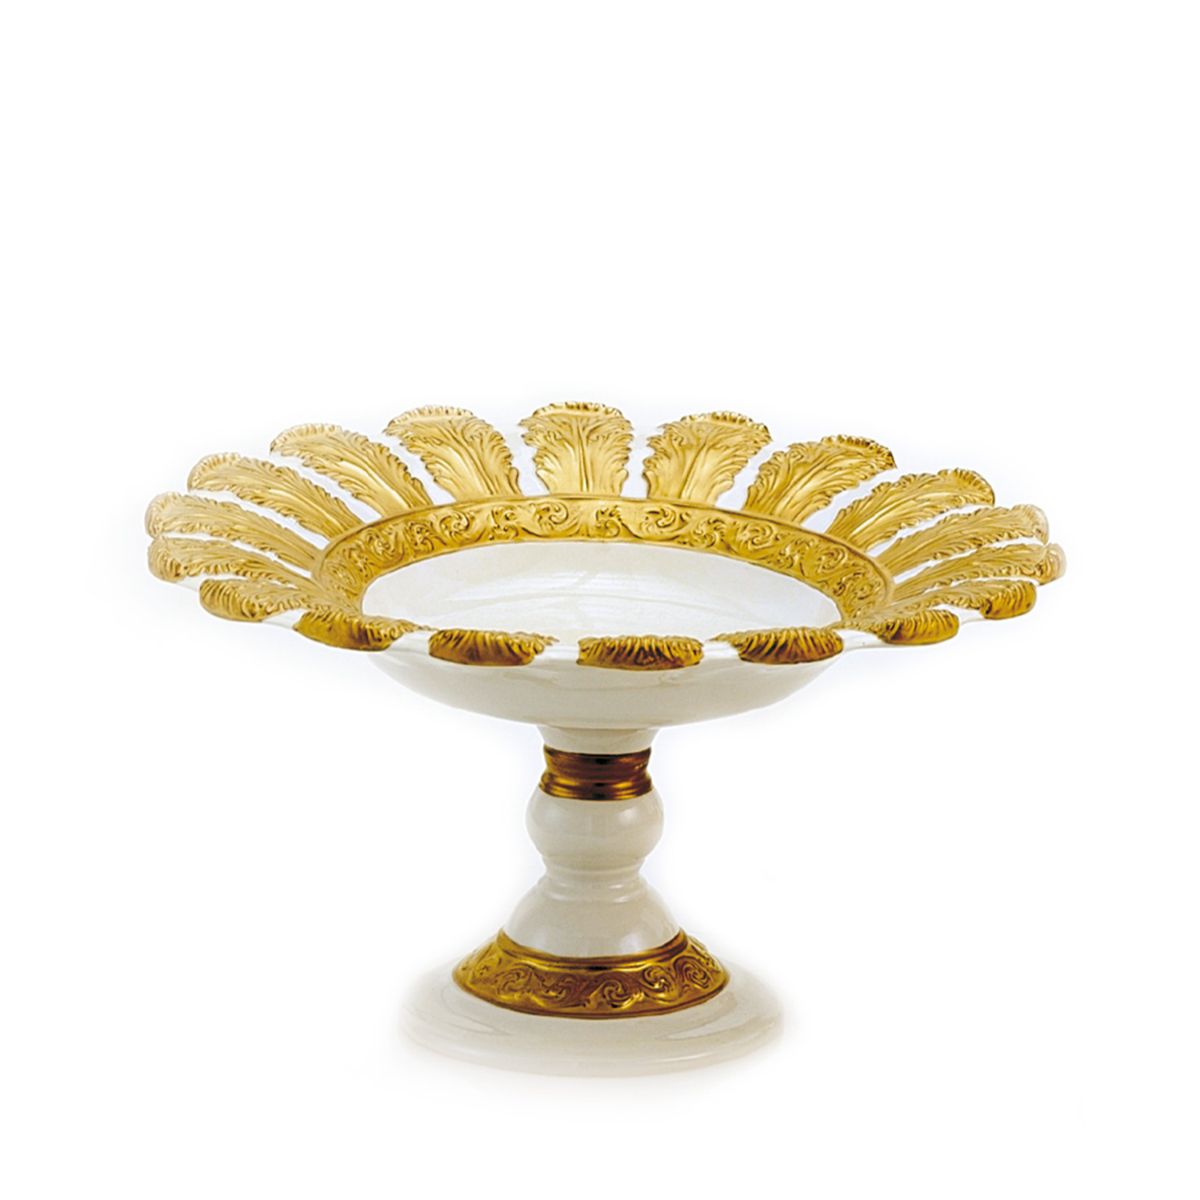 Queen Elizabeth White & Gold Footed Cake Stand